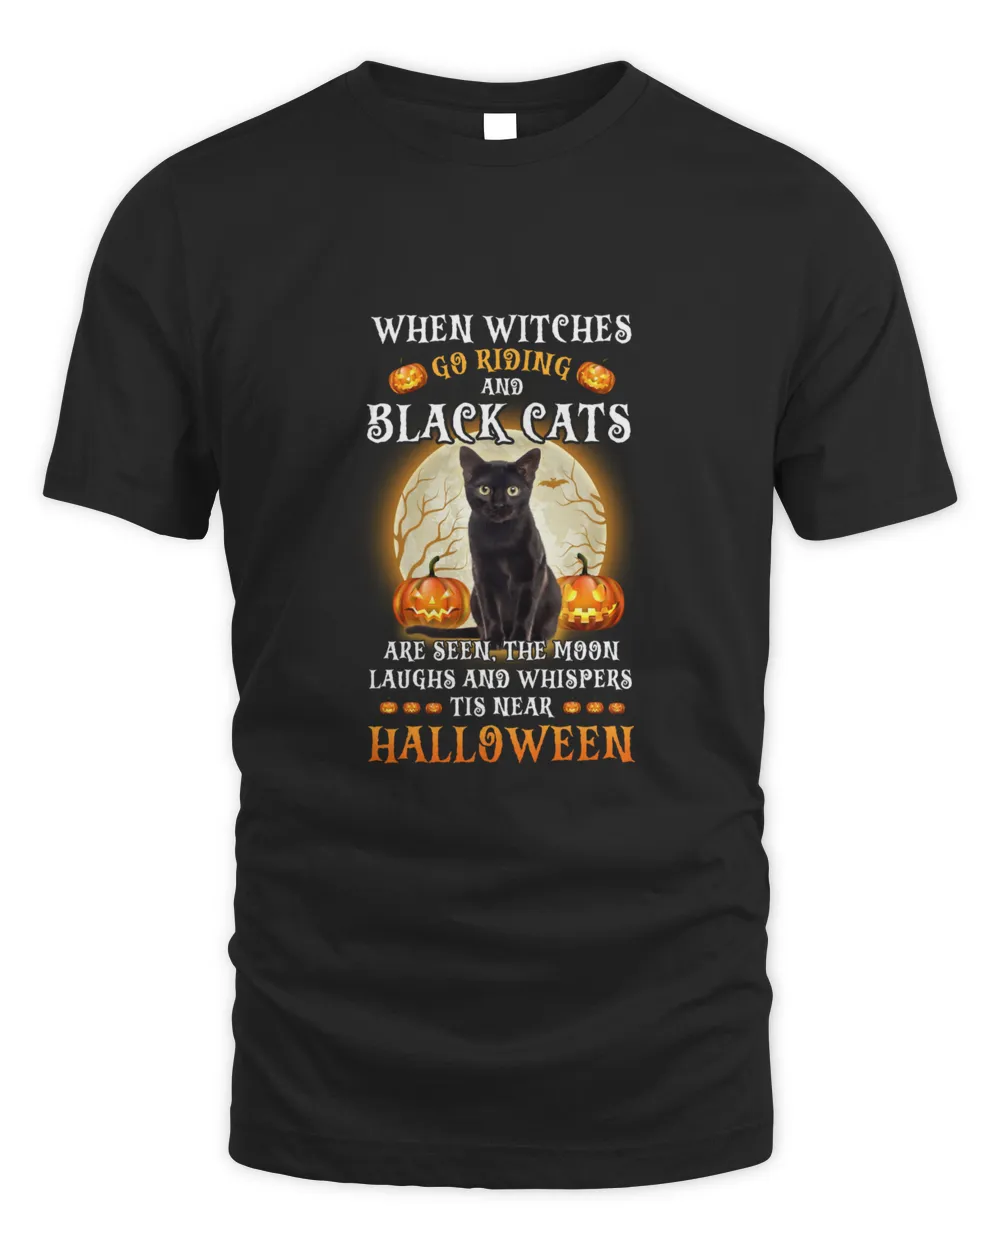 Halloween is coming When Witches Go Riding And Black Cats are seen the moon laughs and whispers tis near halloween Sleeved T-Shirt